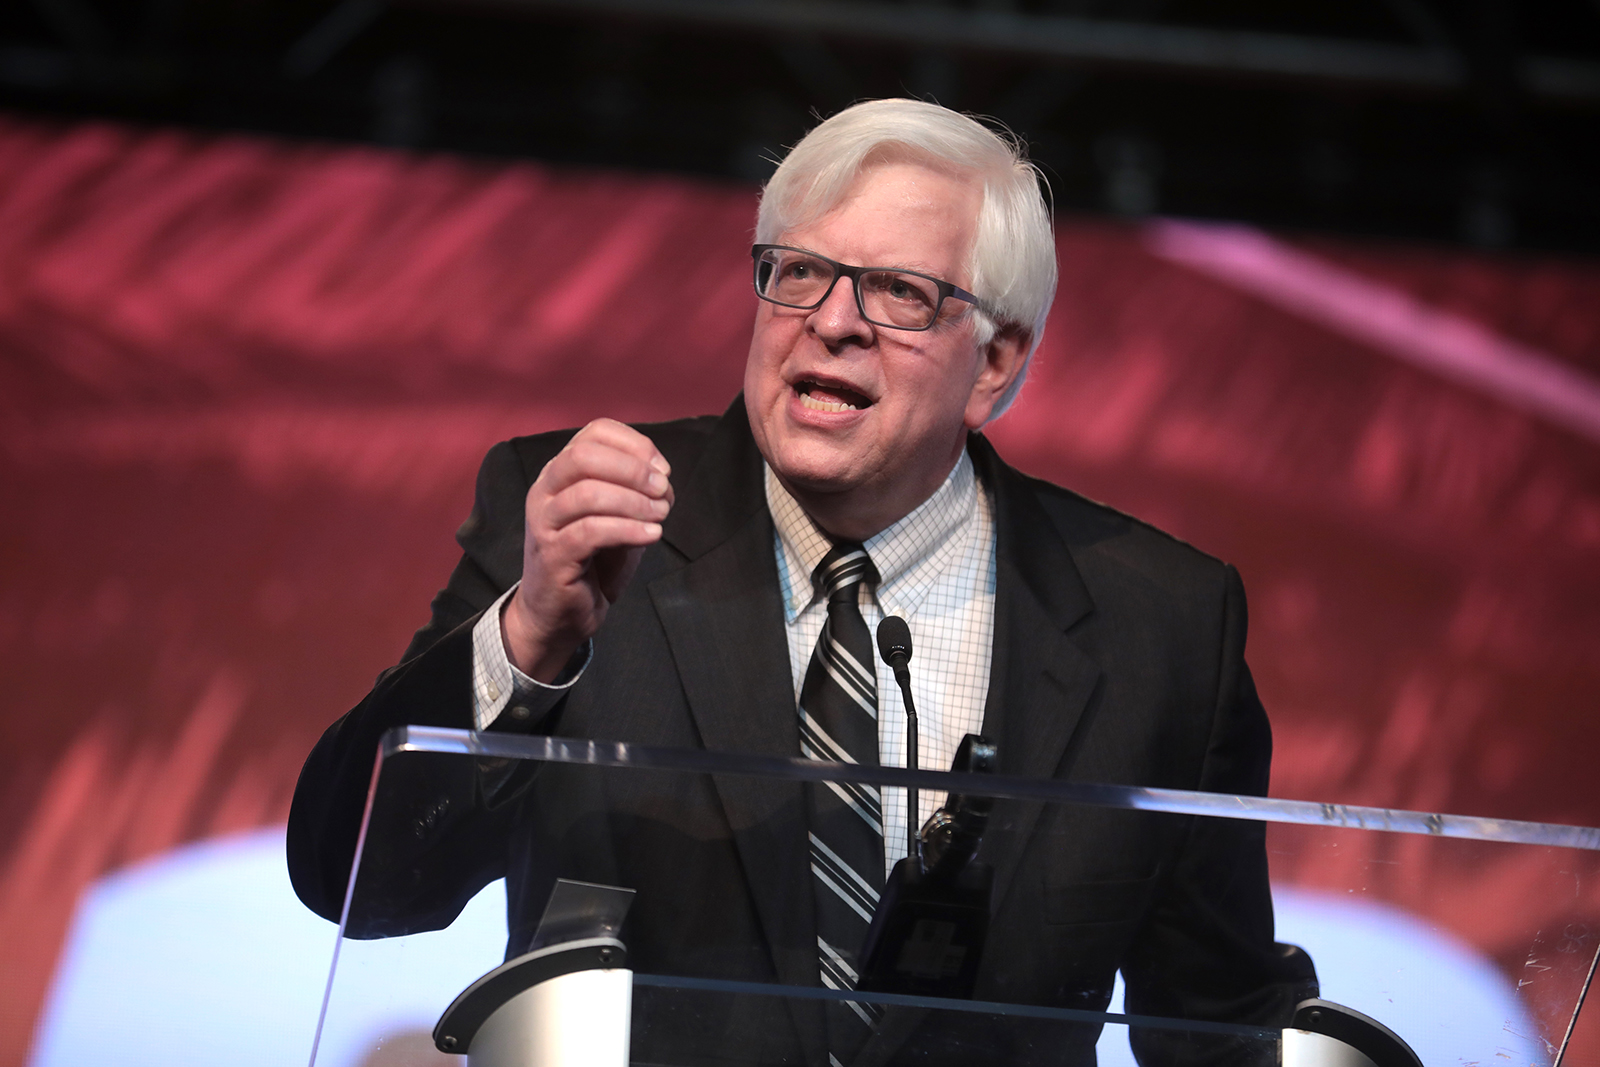 Dennis Prager speaks at the 2018 Student Action Summit hosted by Turning Point USA at the Palm Beach County Convention Center in West Palm Beach, Florida, Dec. 19, 2018. Photo by Gage Skidmore/Creative Commons